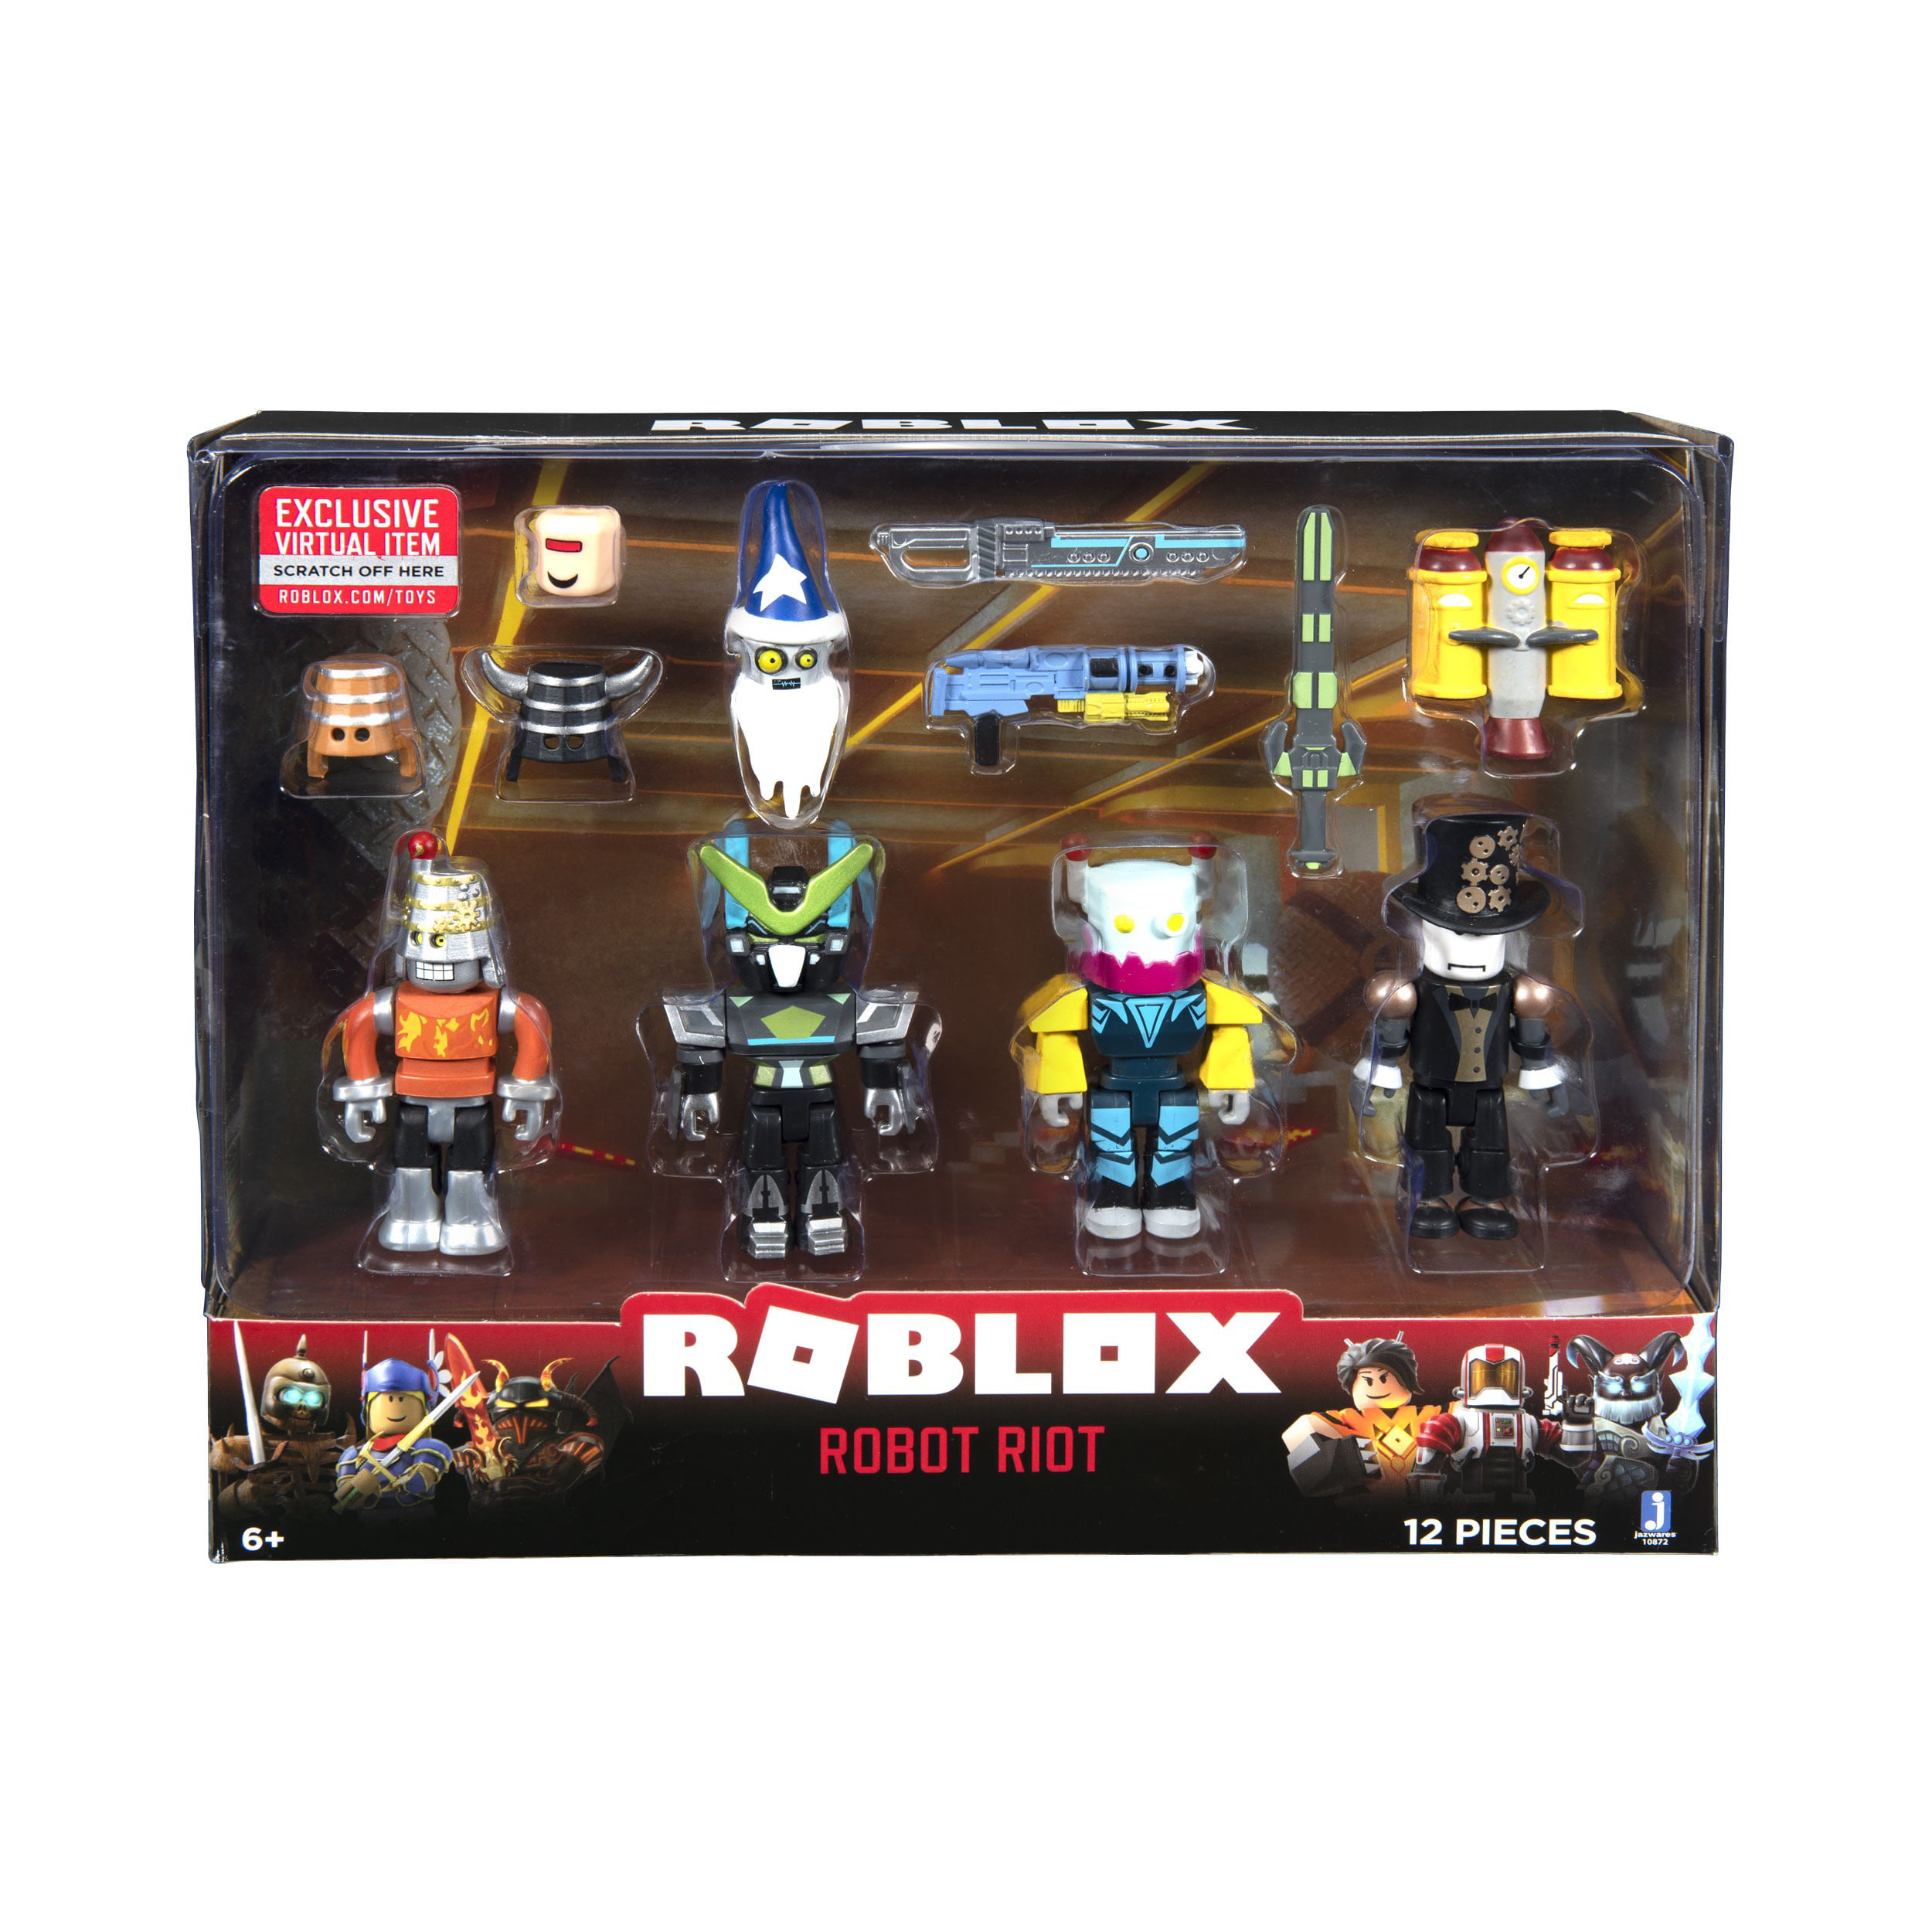 Roblox Action Collection Robot Riot Four Figure Pack Includes Exclusive Virtual Item Walmart Com Walmart Com - toys hobbies roblox robot riot 4 figure pack mix match